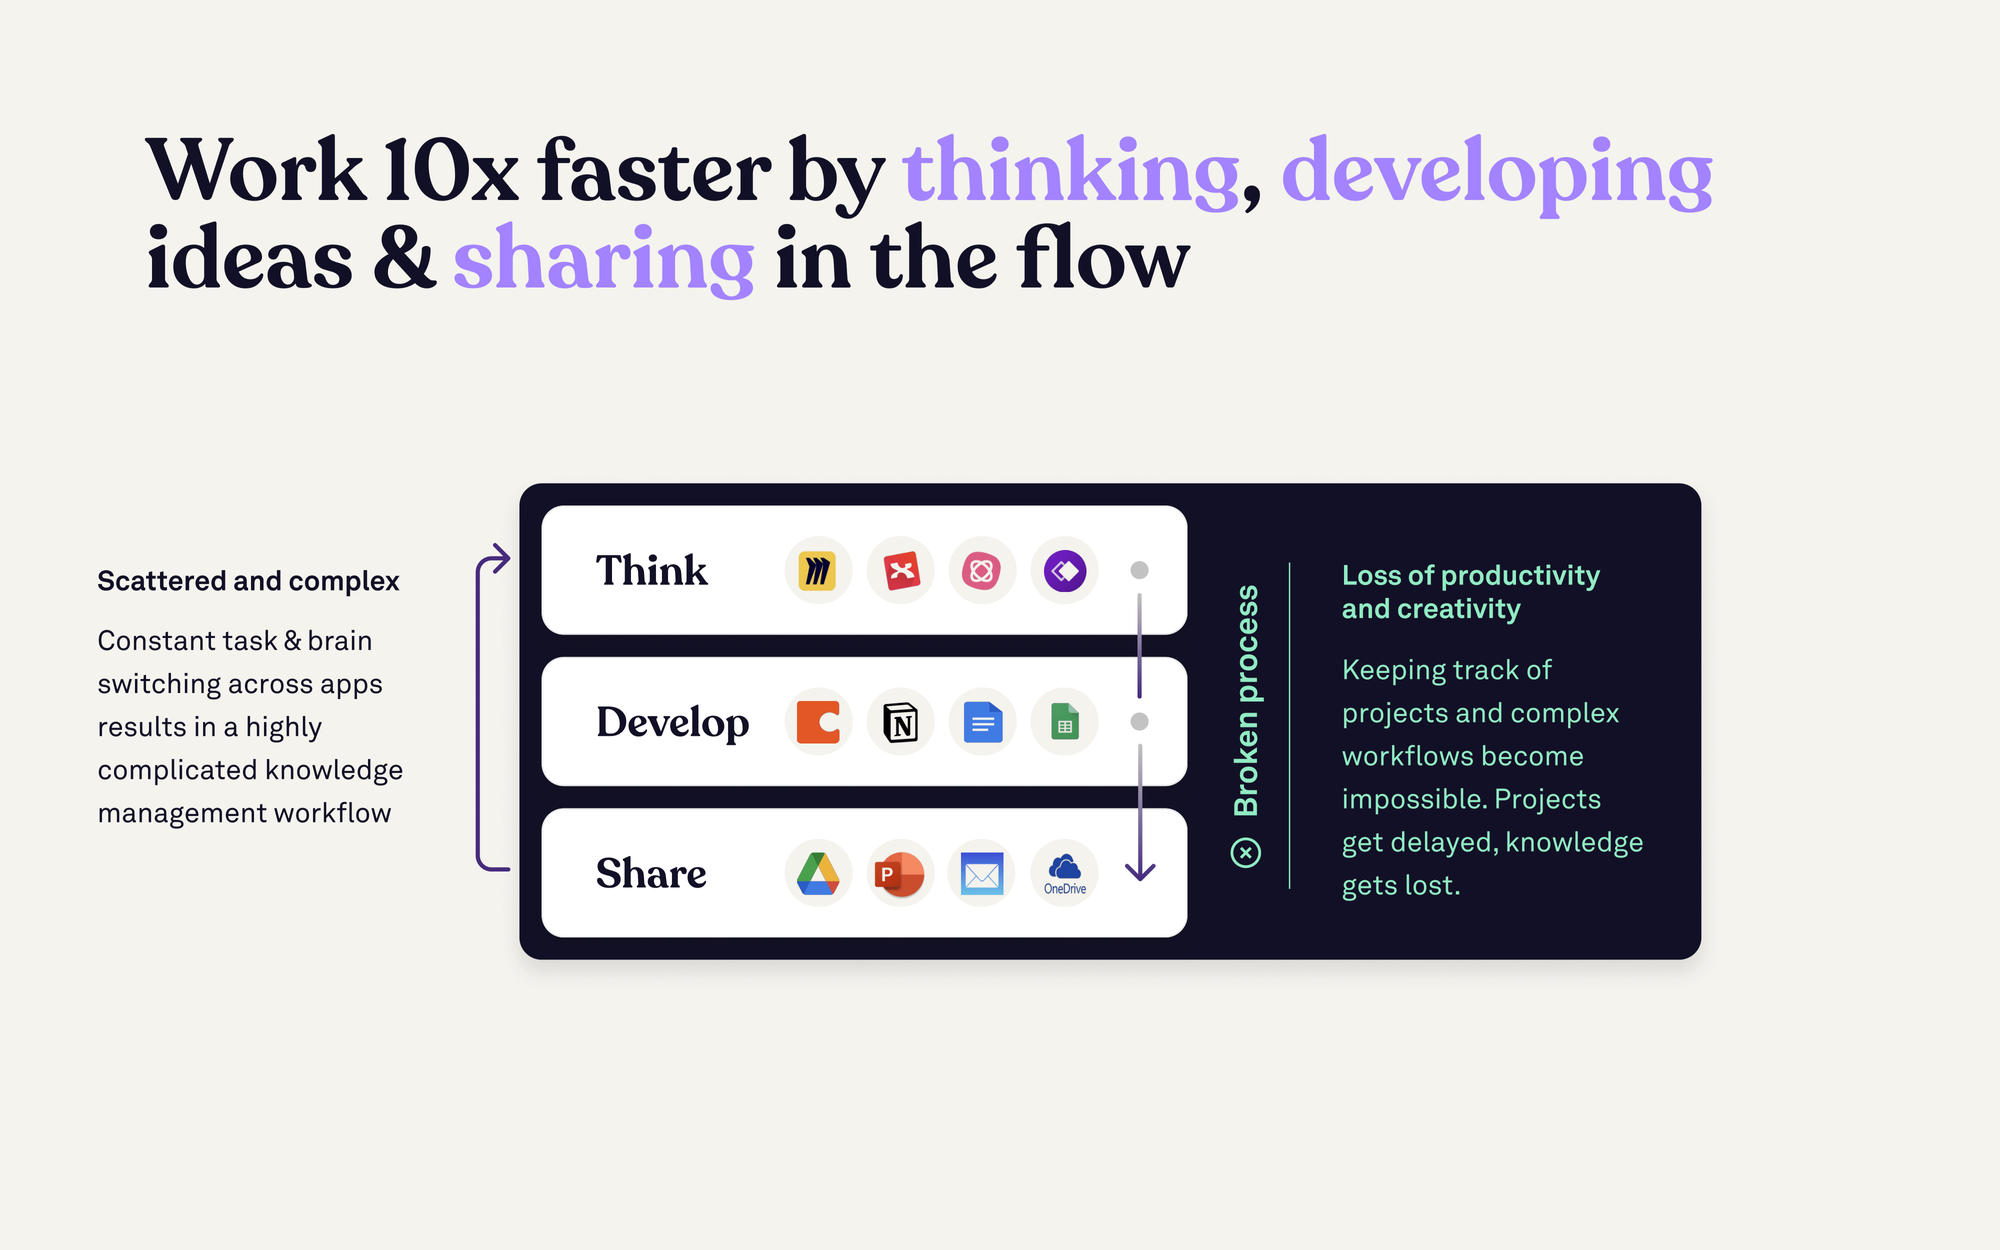 Value proposition slide showing that work 10x faster by thinking, developing ideas, and sharing in the flow